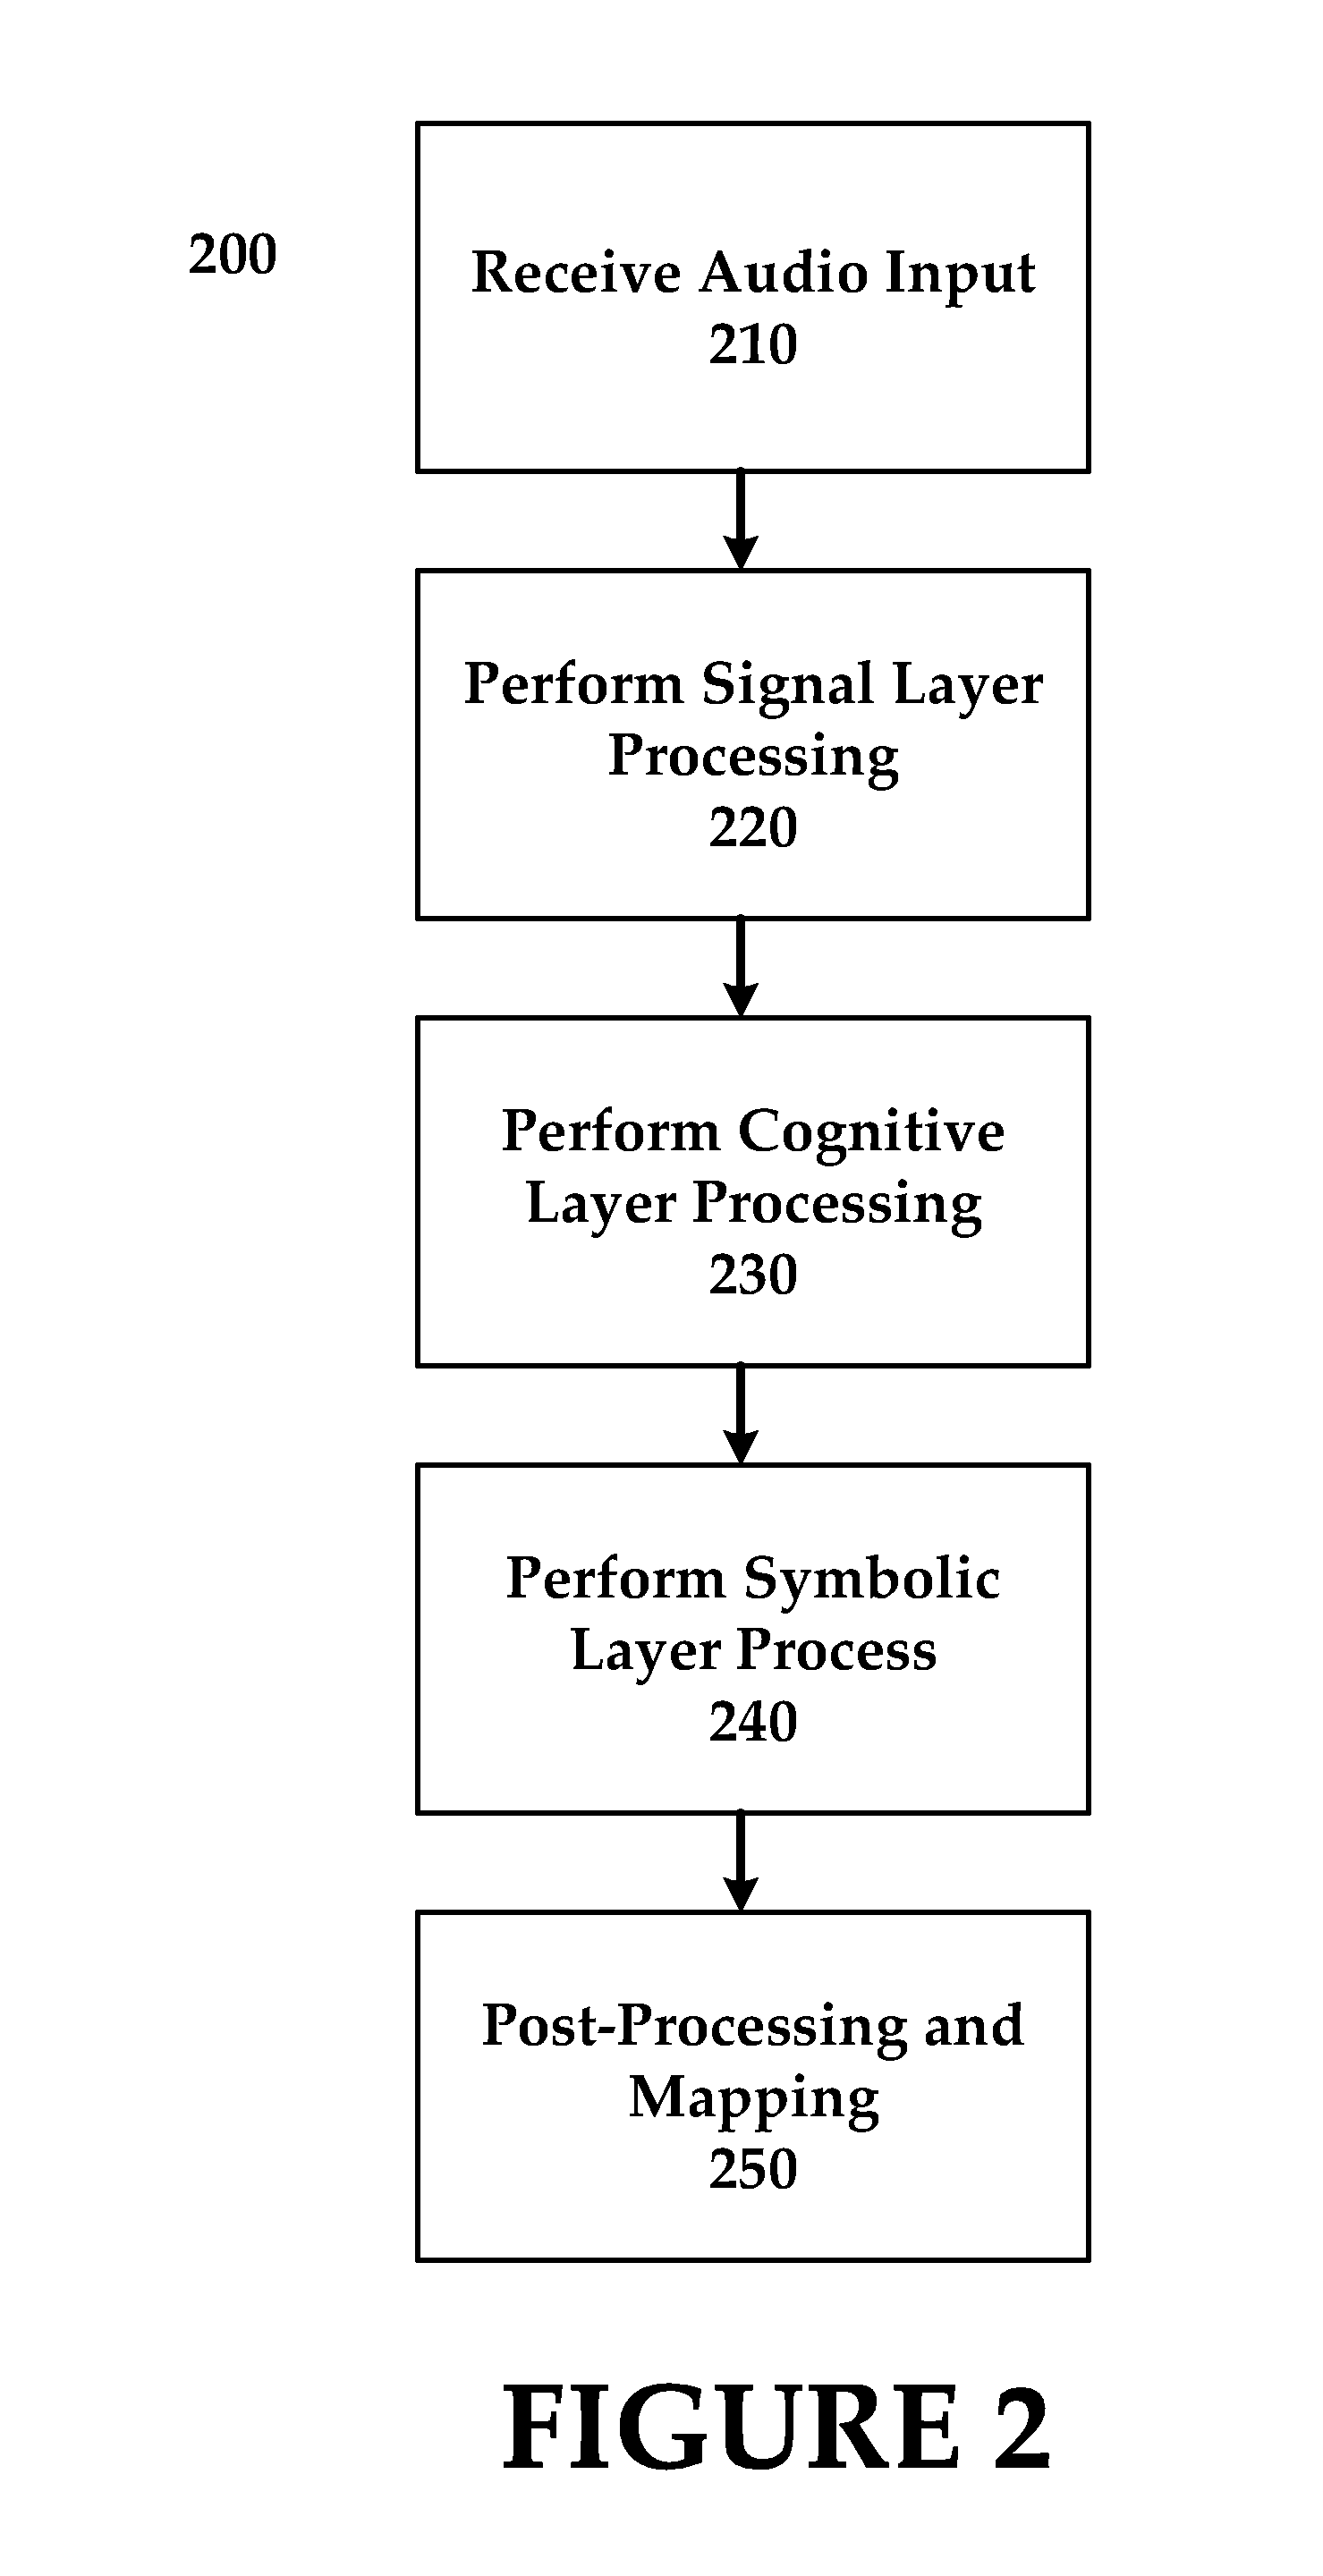 Automatic labeling and control of audio algorithms by audio recognition